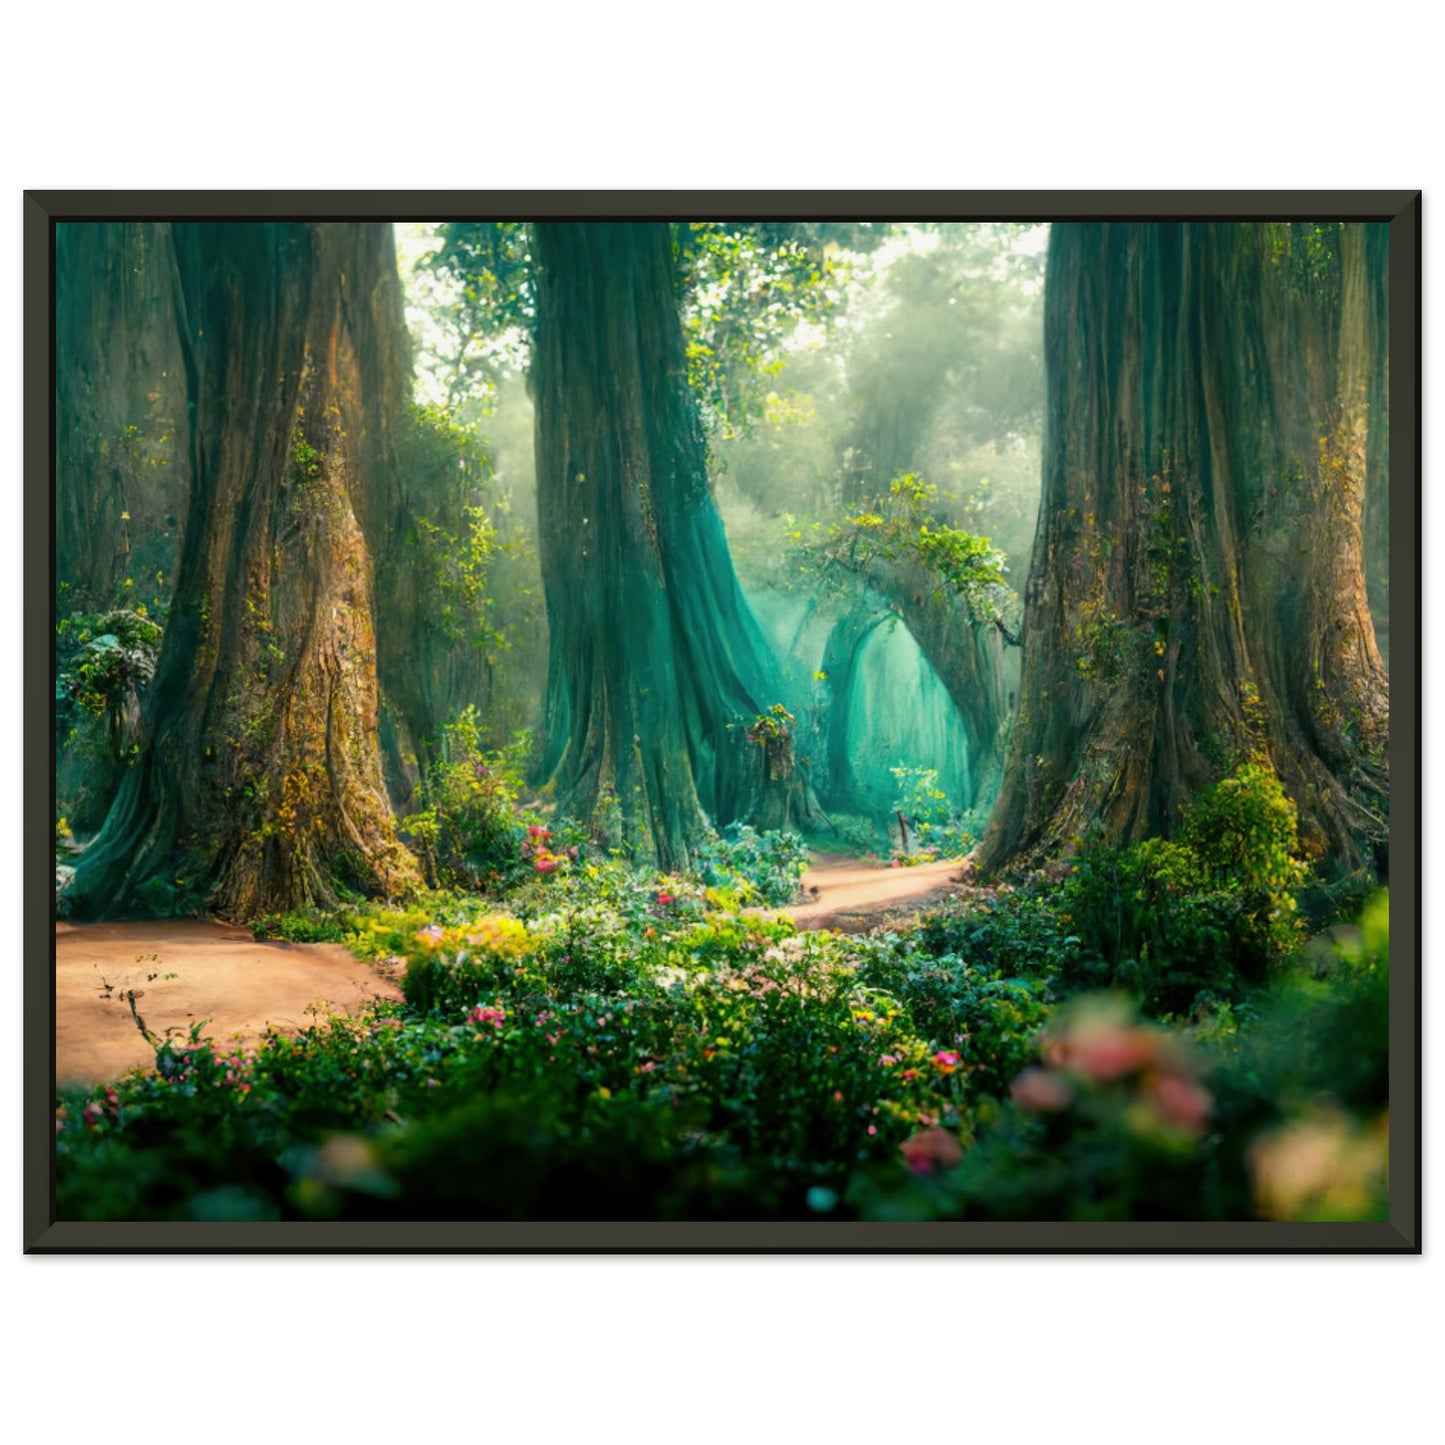 Fairy tale forest